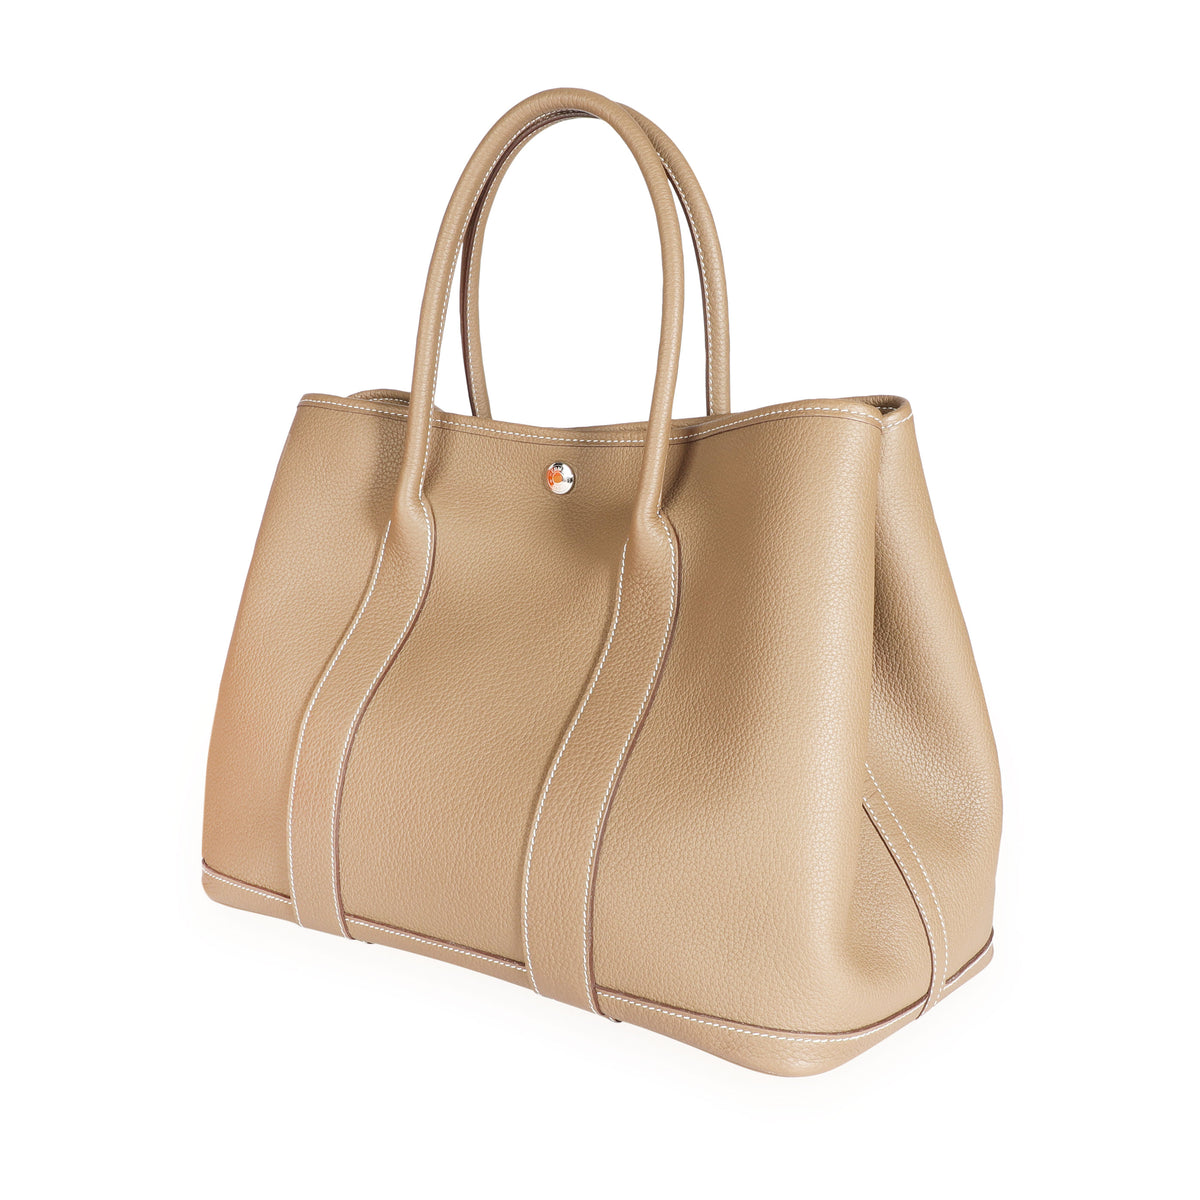 Hermes Garden Party 36 Gold Country Negonda Leather Bag